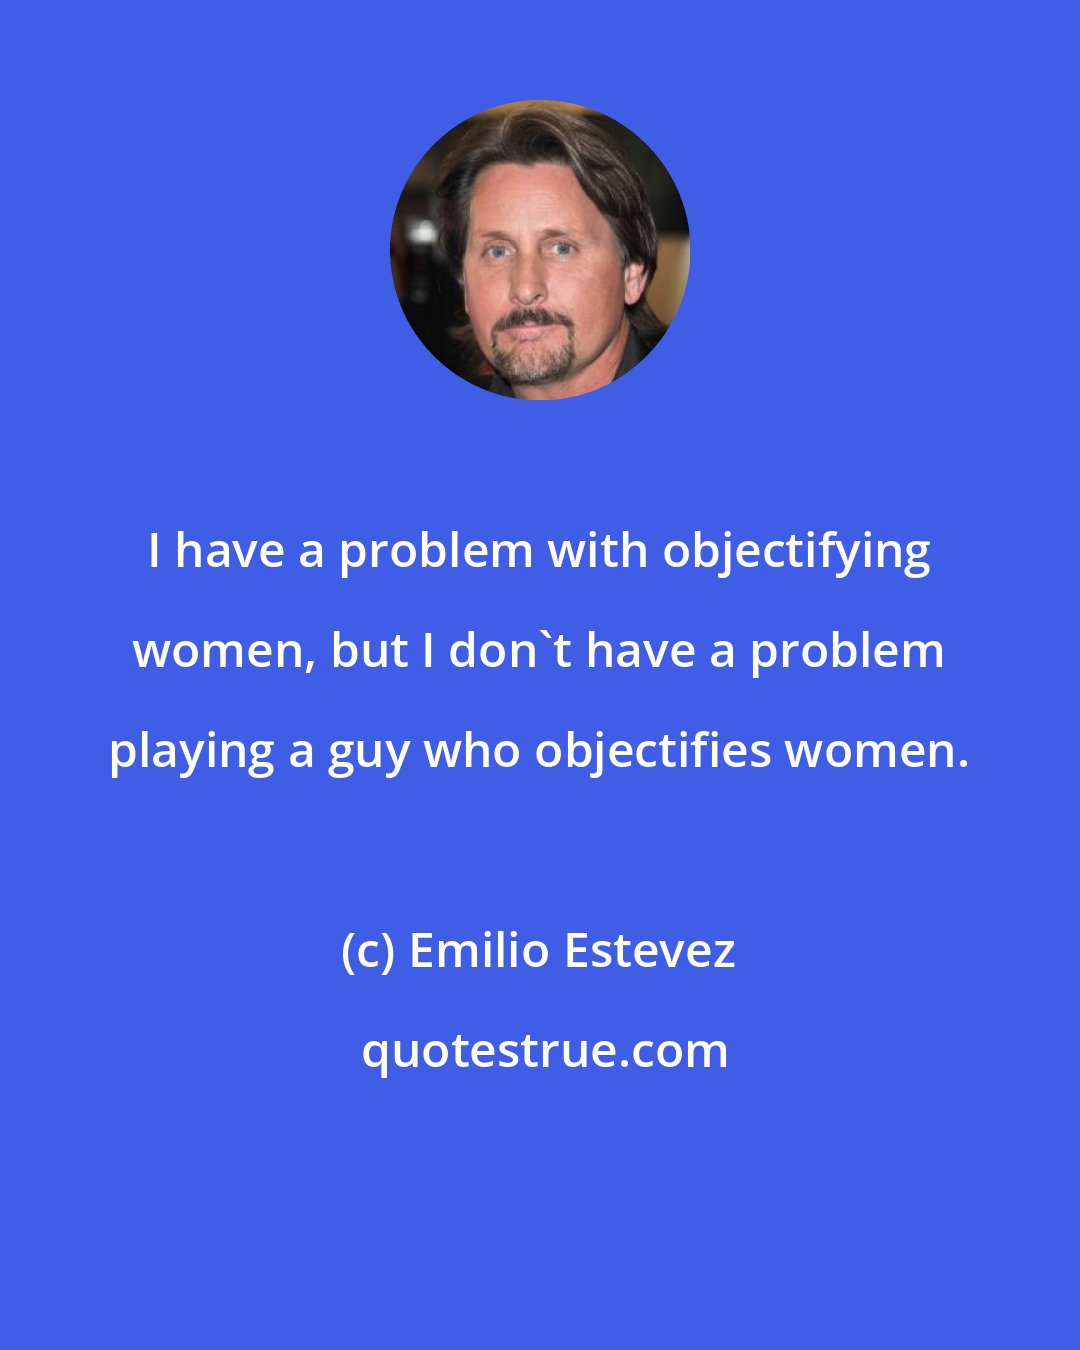 Emilio Estevez: I have a problem with objectifying women, but I don't have a problem playing a guy who objectifies women.